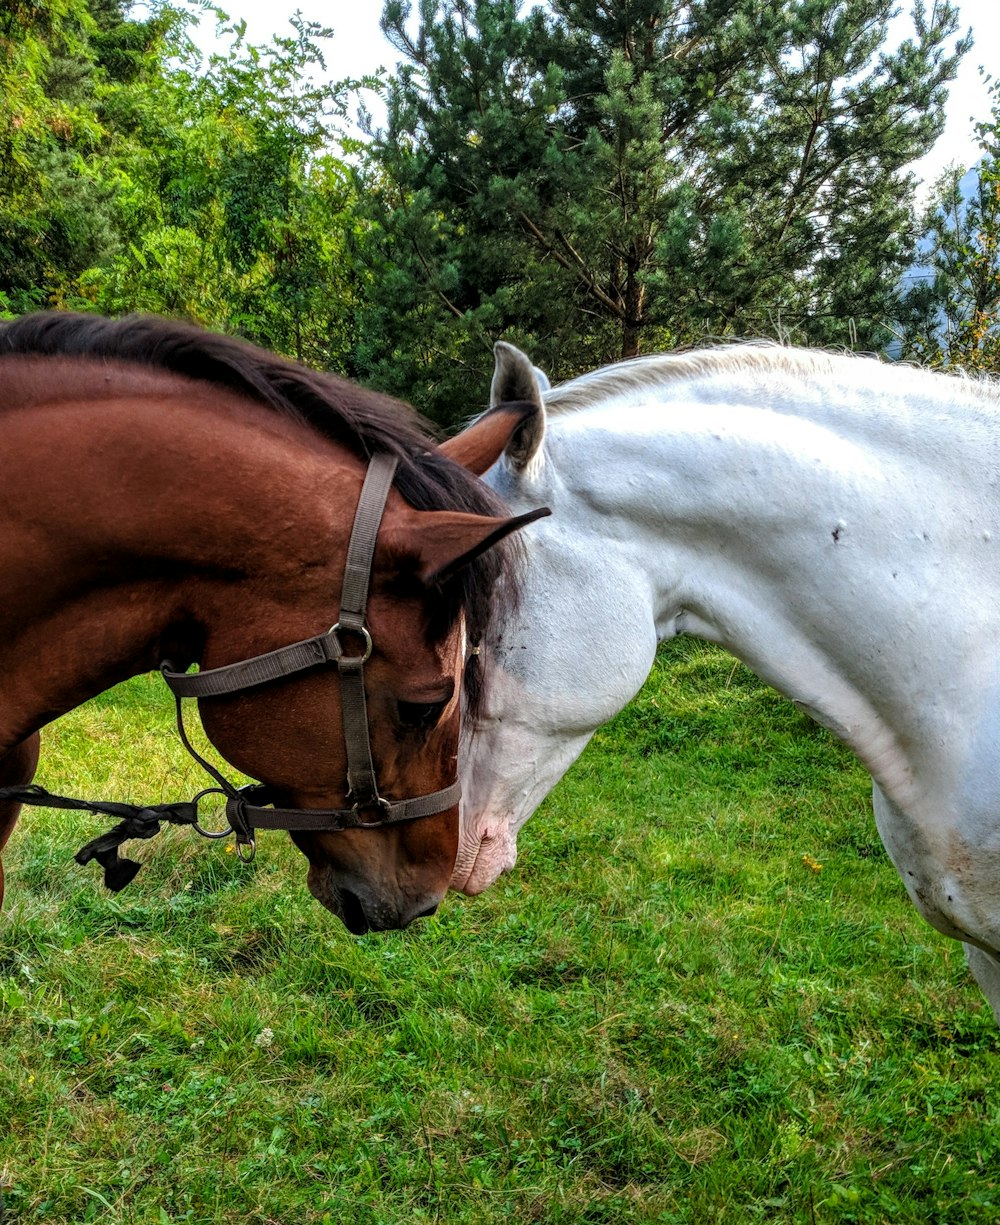 two white and brown horses bumping each others heads on grass field